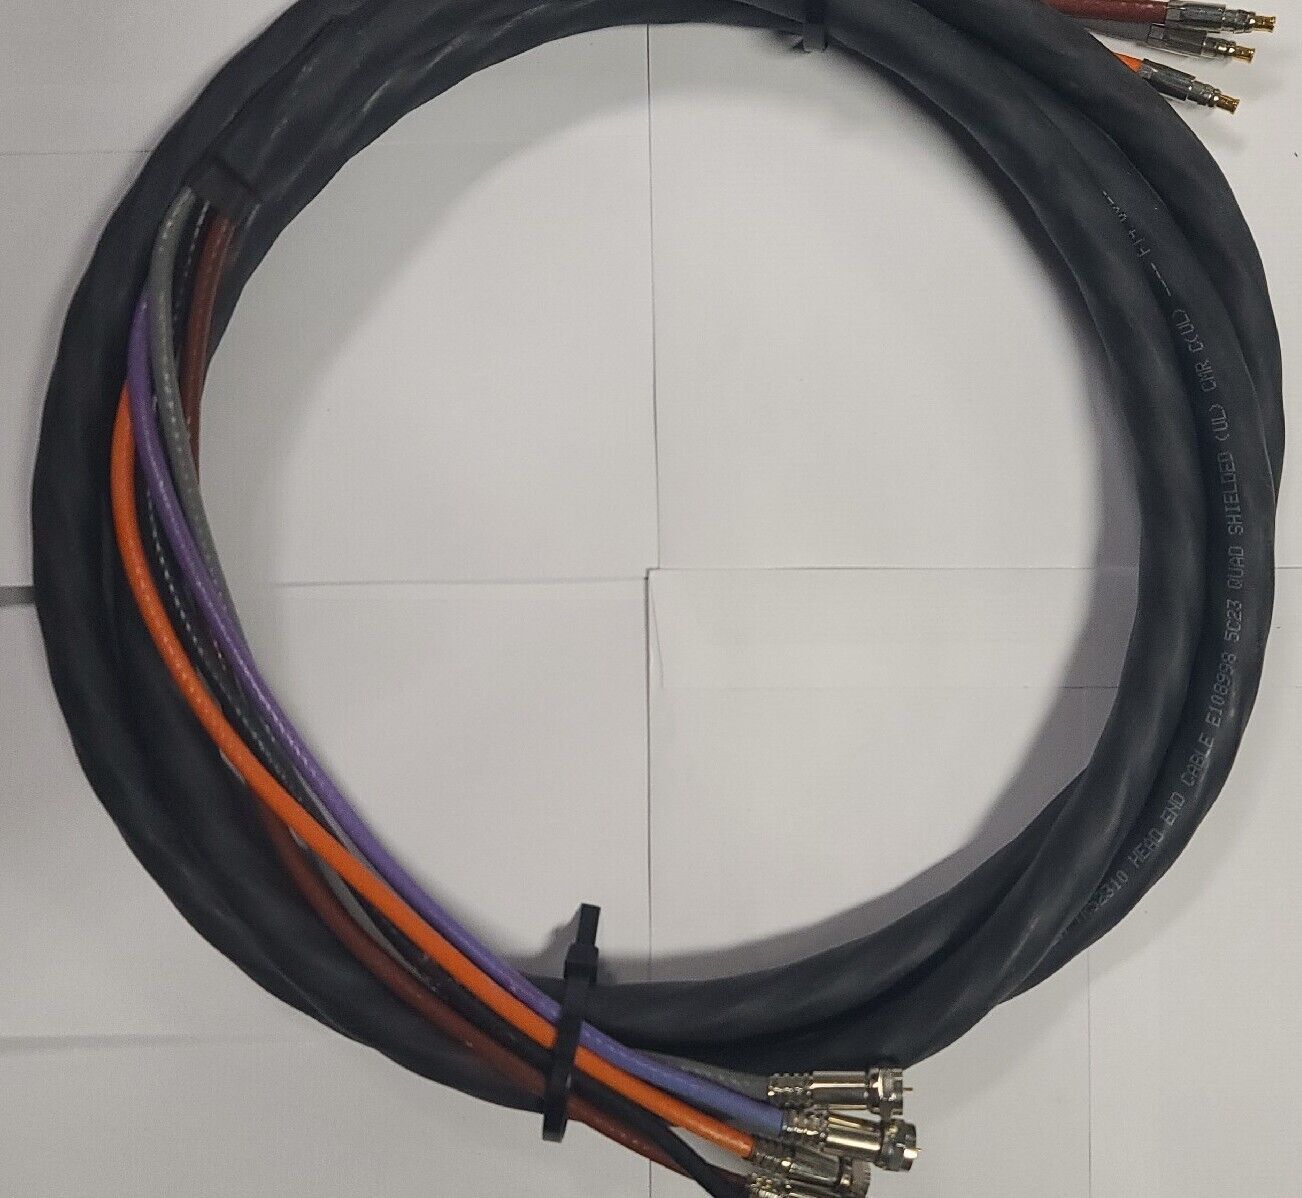 5 WIRE MINI COAX RGB CABLE BUNDLE FOR COMPONENT VIDEO 10FT